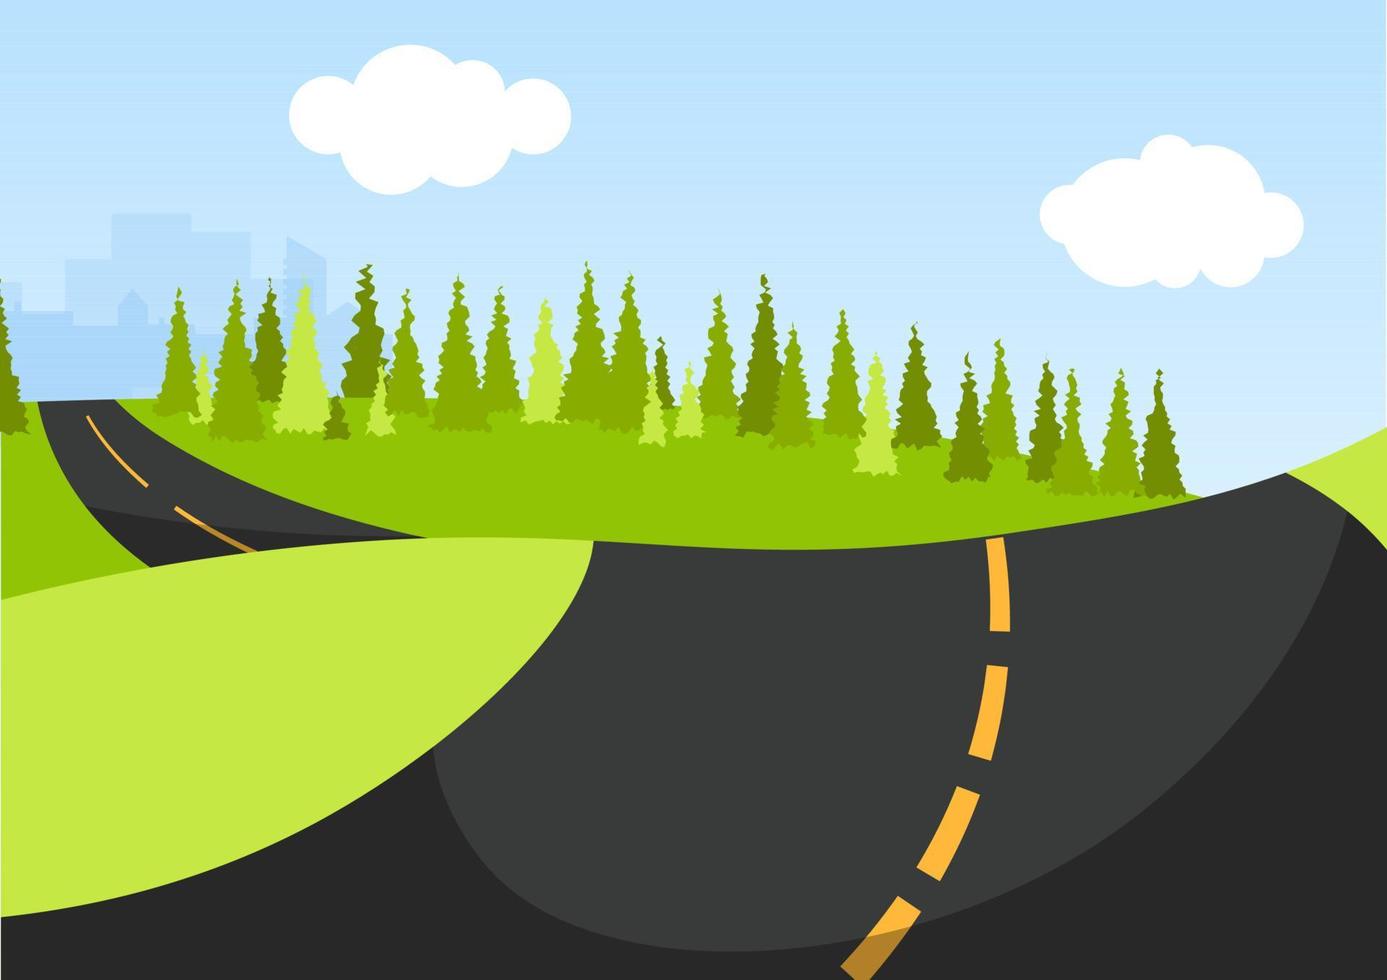 Road in perspective with a forest in the background vector